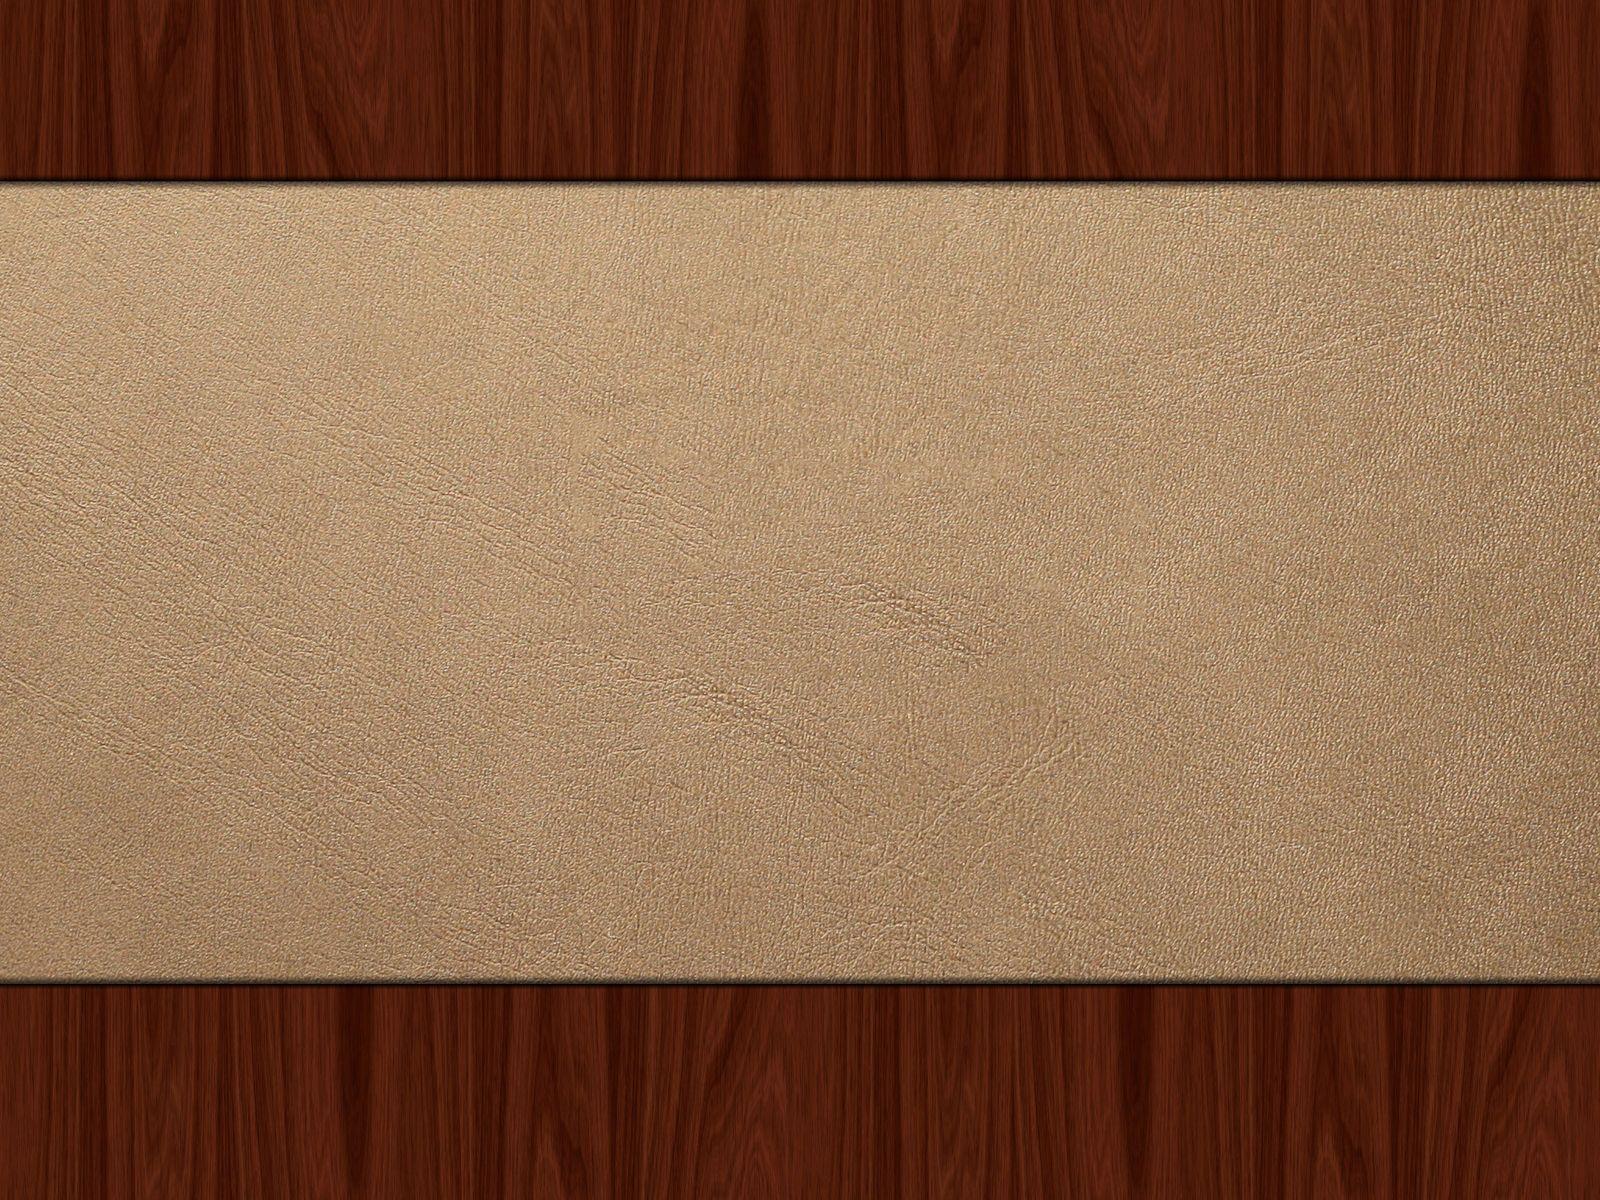 Free Brown Texture With Wood Band Background For PowerPoint